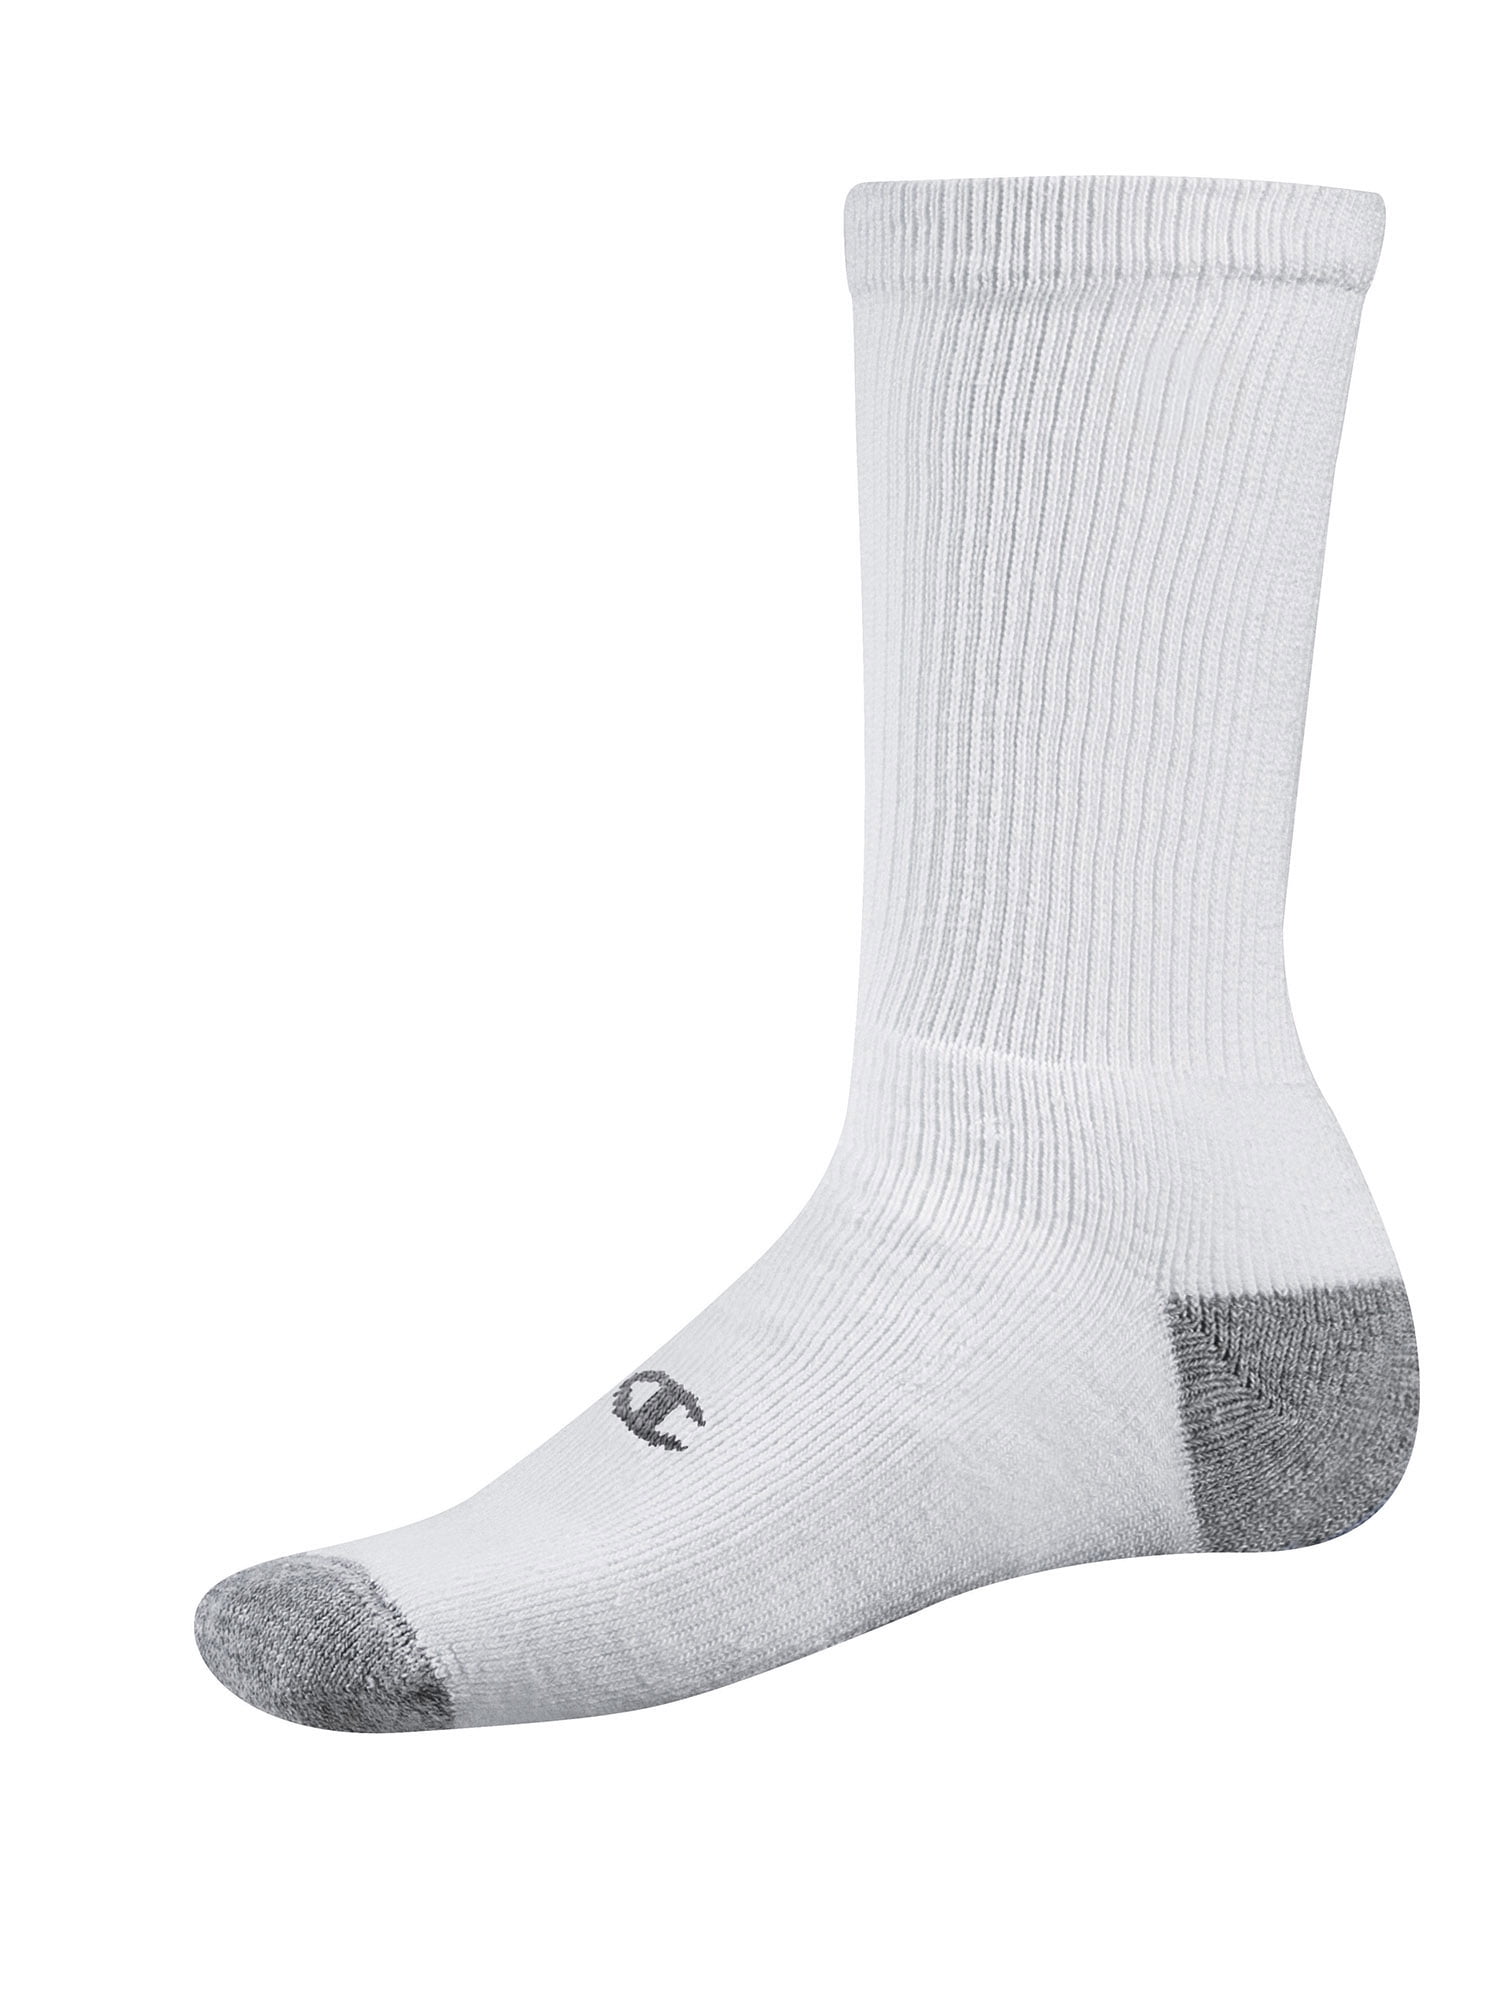 comes with a sock ring CRAWE L SockGuy Crew 6 Socks Awesome L/XL M 9 13, W 10 14